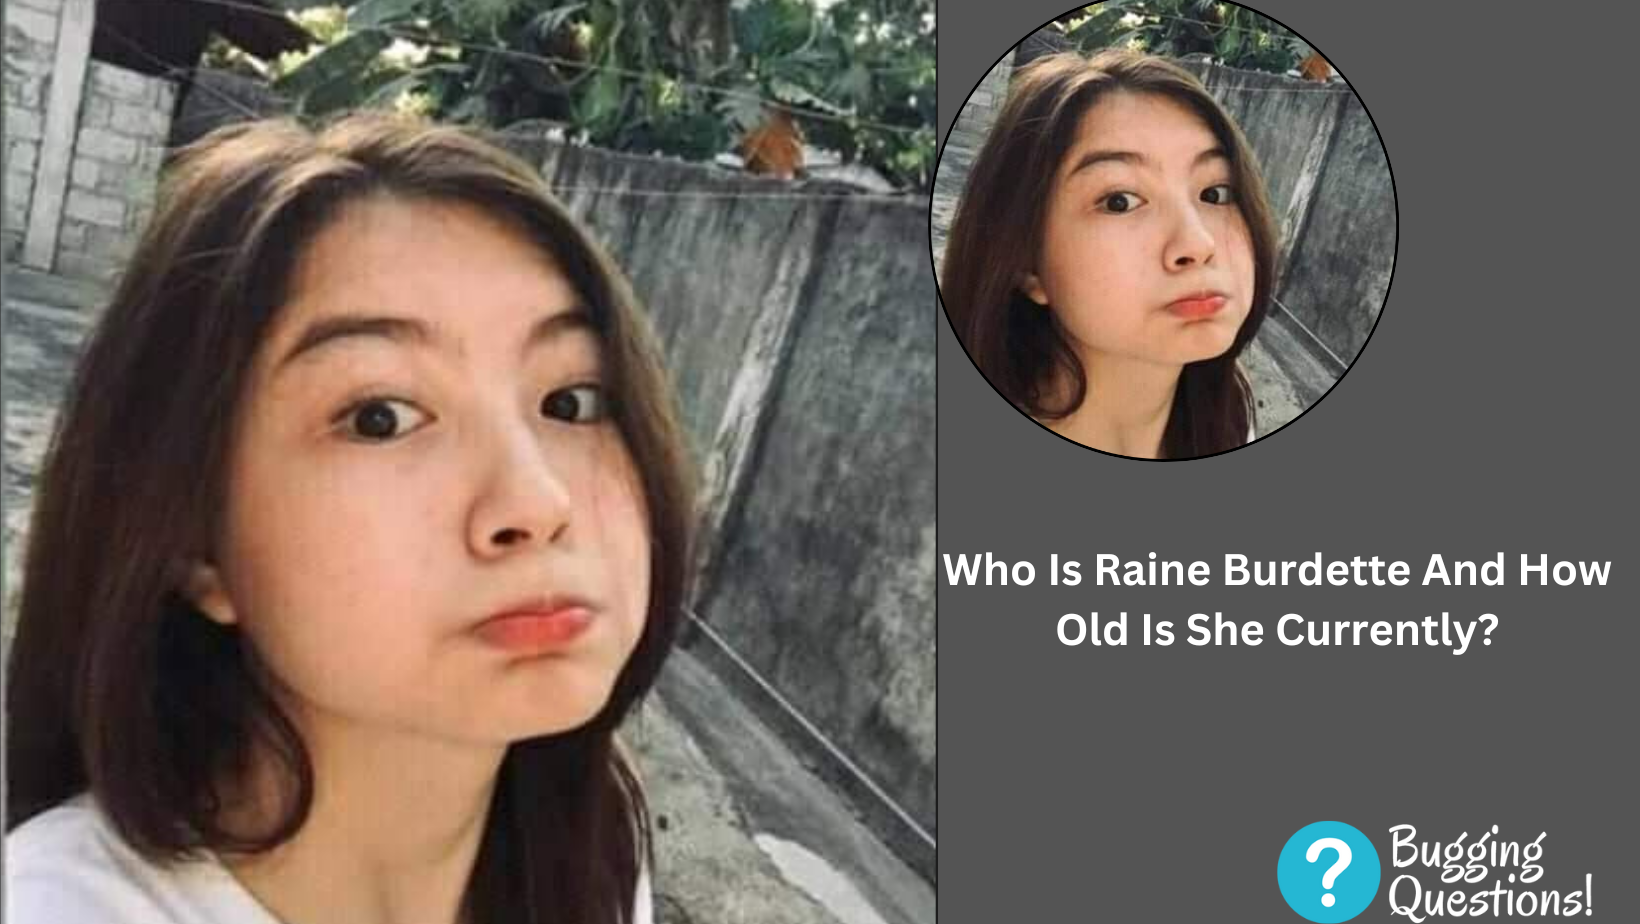 Who Is Raine Burdette And How Old Is She Currently?